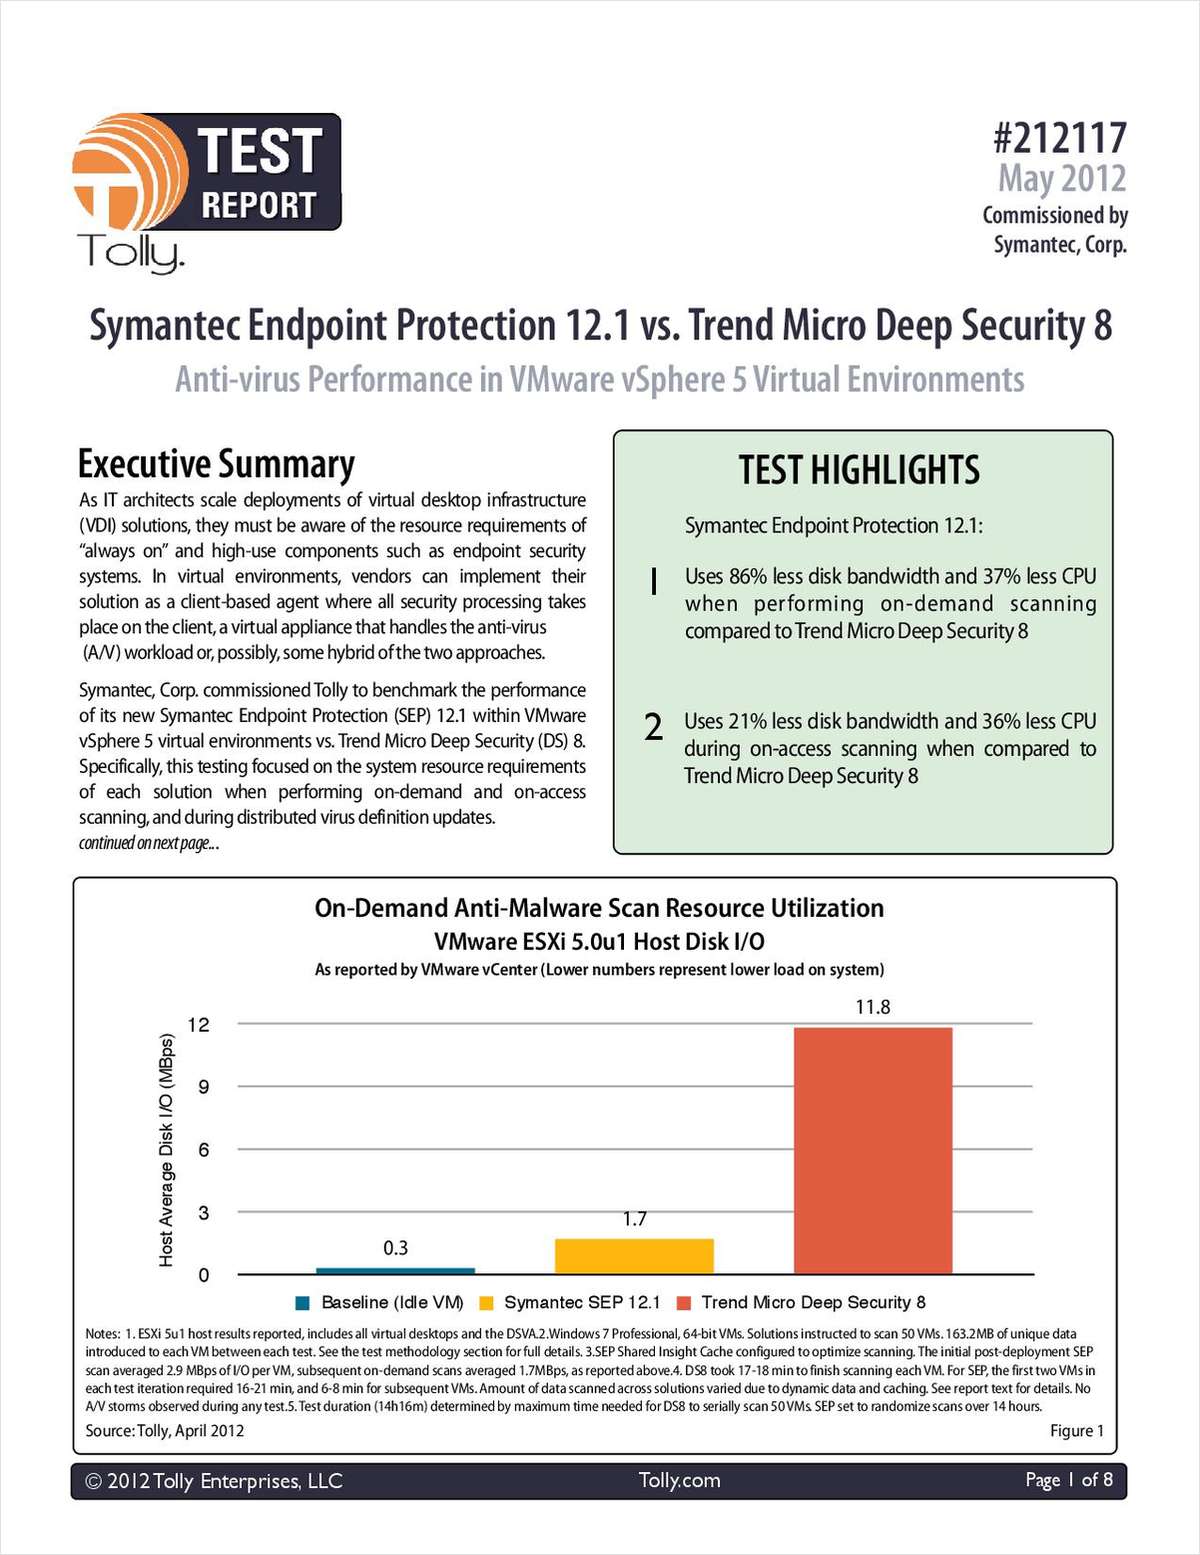 Tolly Report: Symantec Endpoint Protection 12.1 vs. Trend Micro Deep Security 8